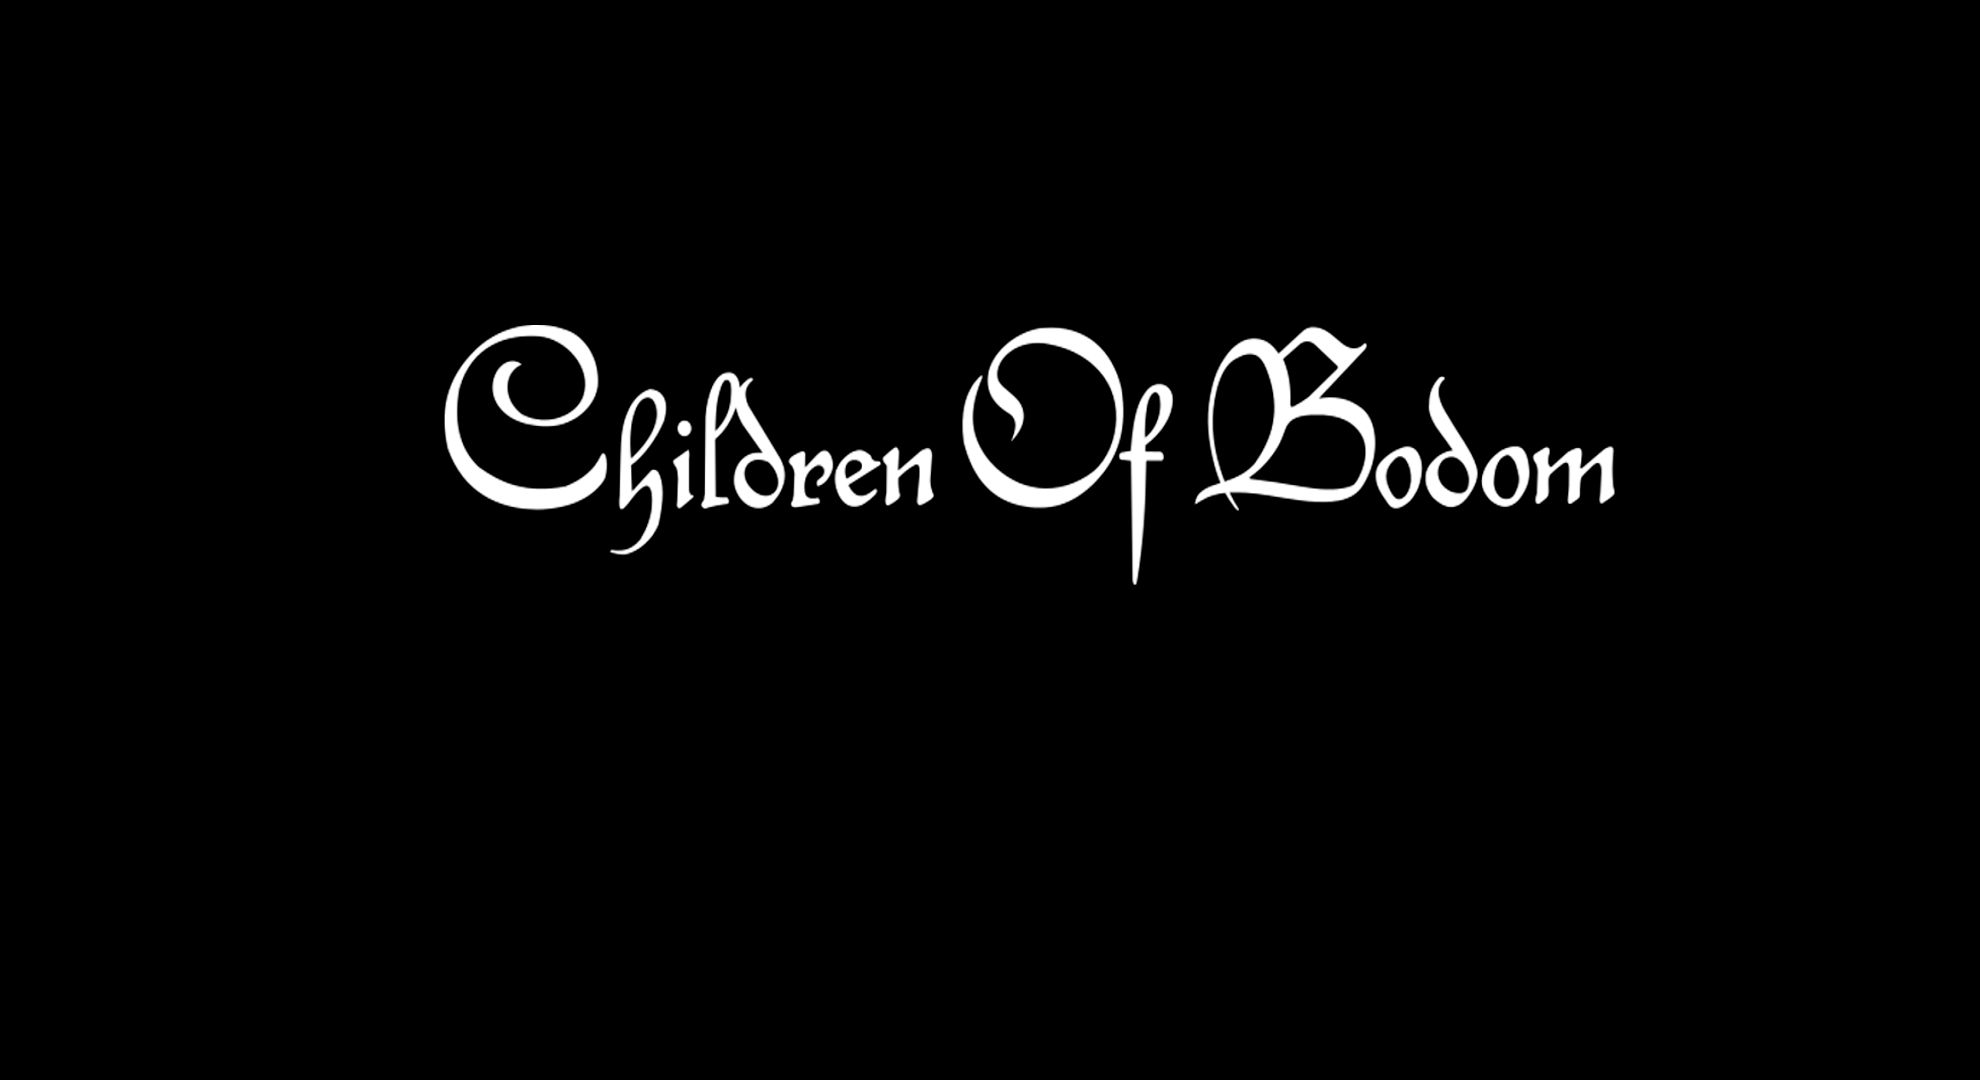 death metal, children of bodom, music, heavy metal, logo, thrash metal for android